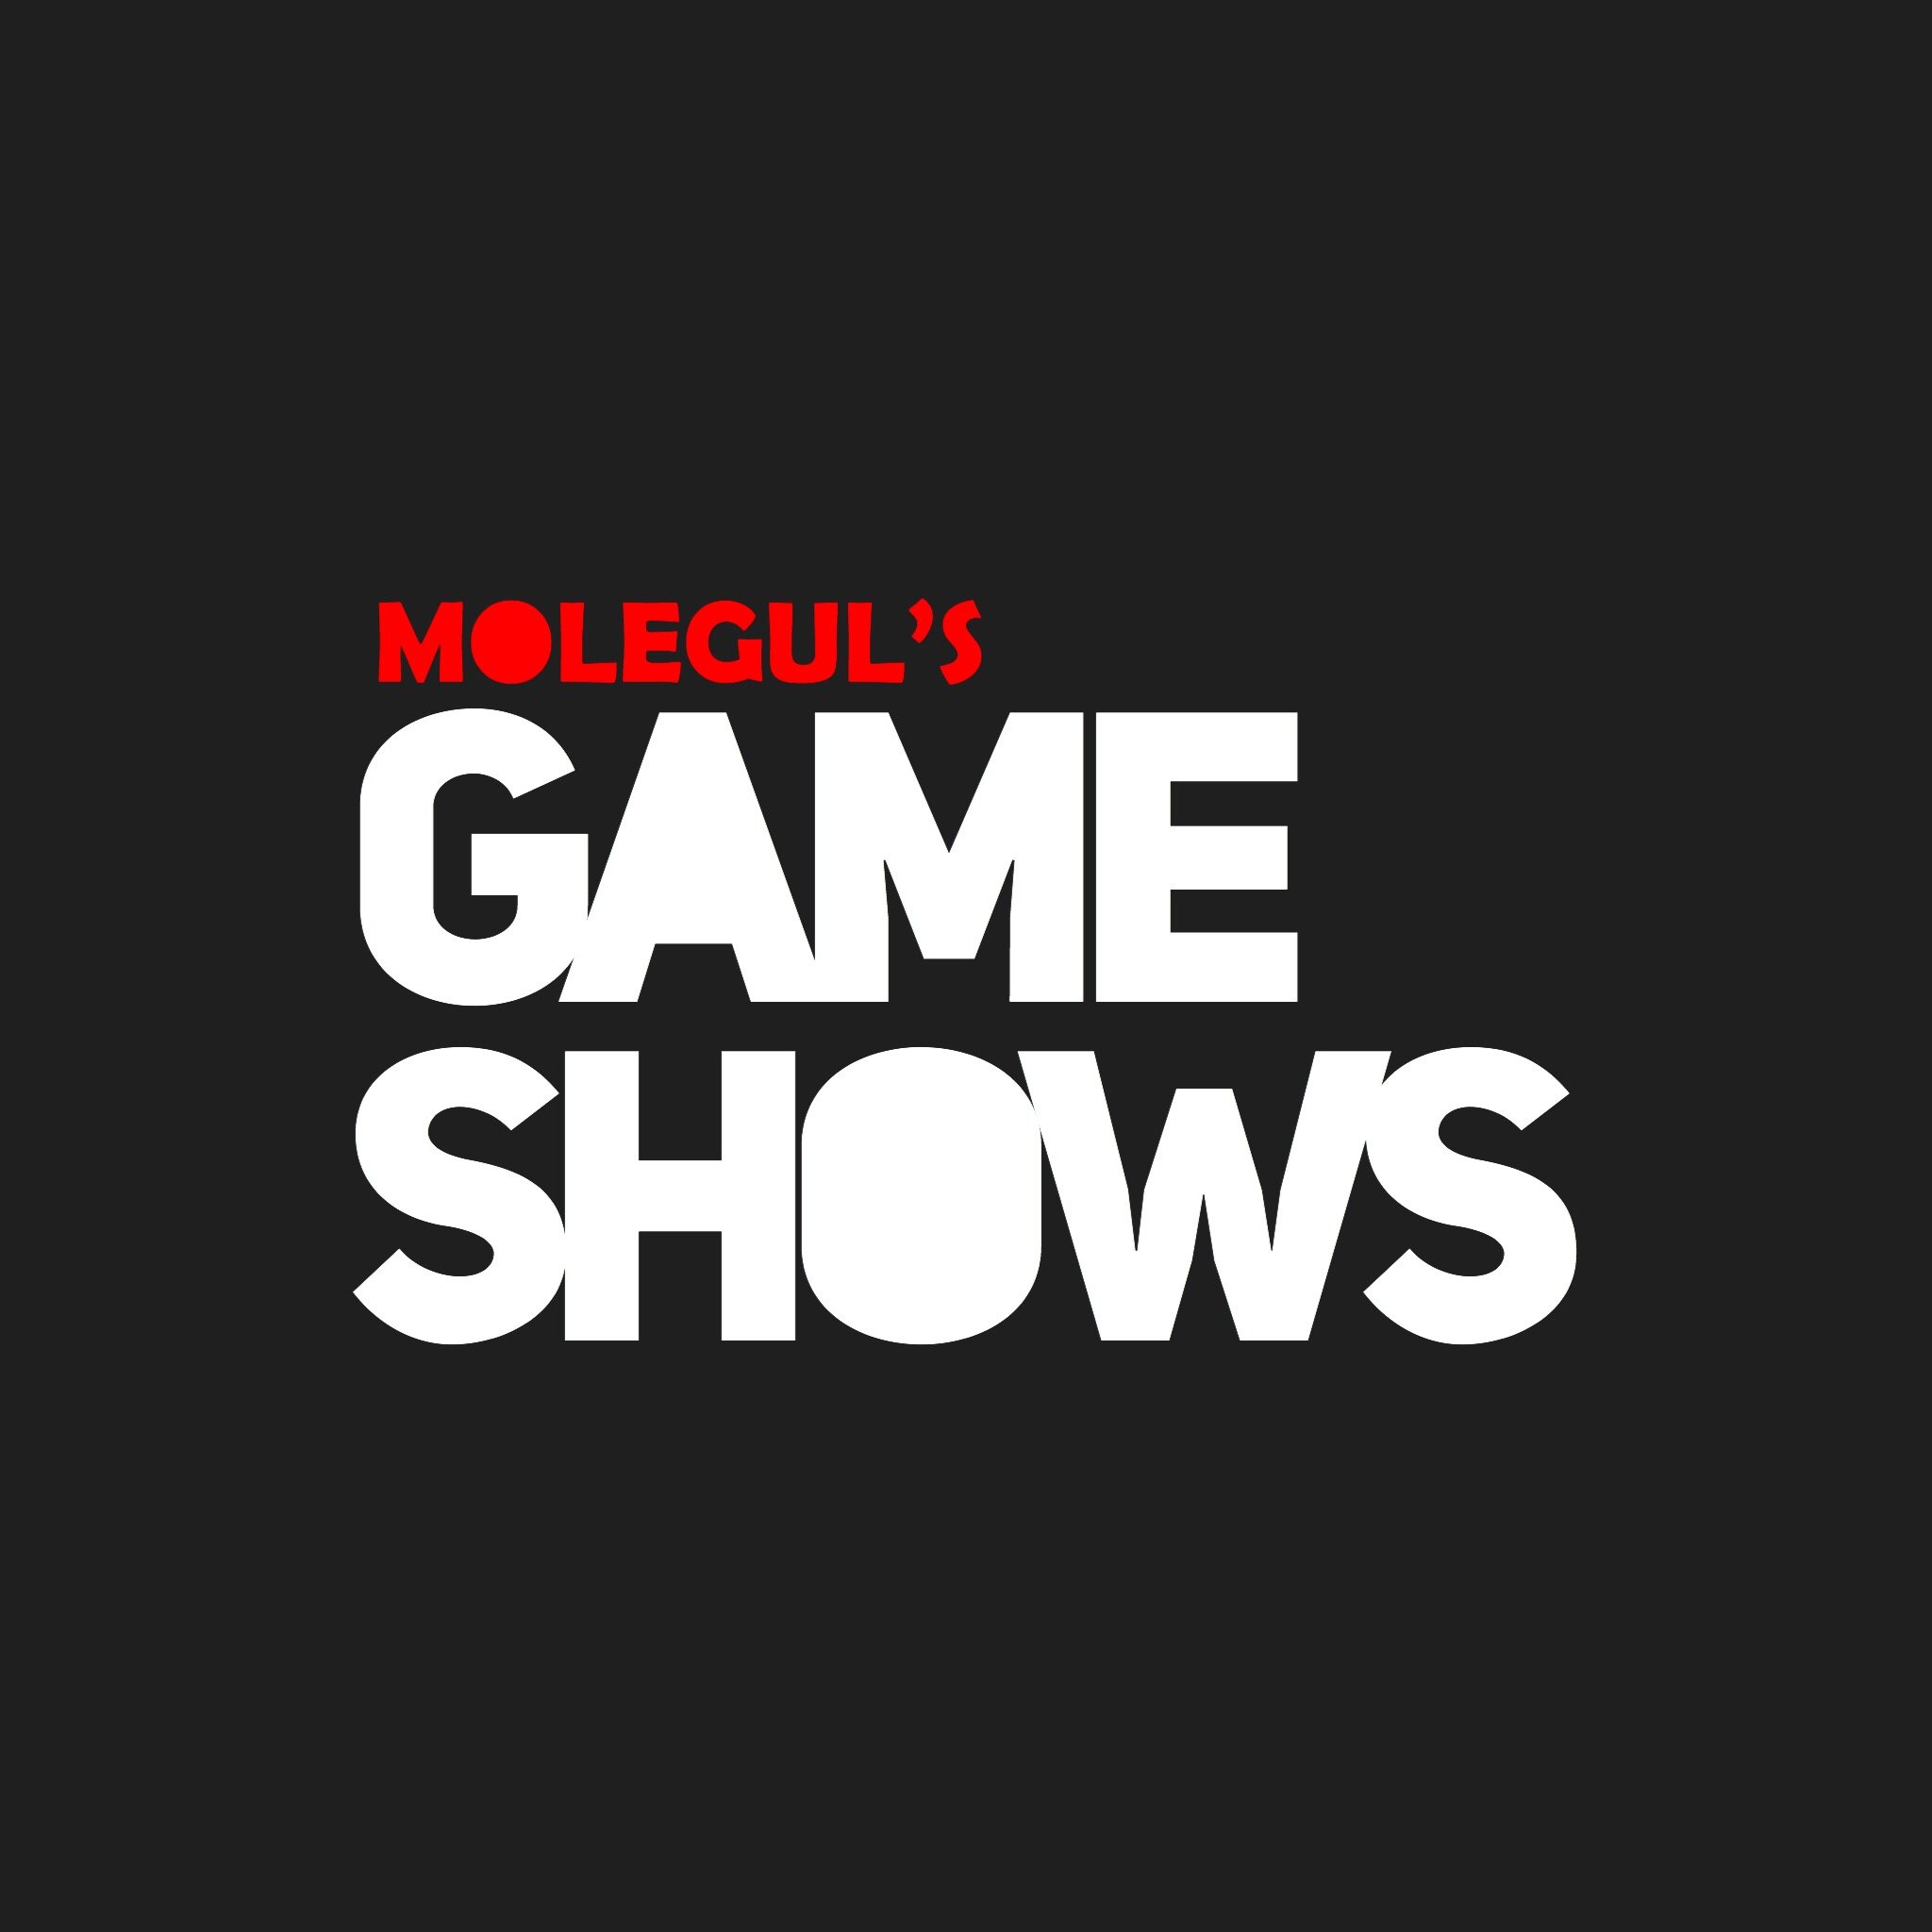 Molegul S Game Shows On Twitter Hosting The 3rd Molegul S Hunger Games Simulation First 48 People To Reply To This Tweet With Your Roblox Profile Will Be Included In The Hunger Games Simulation - the hunger games new update roblox